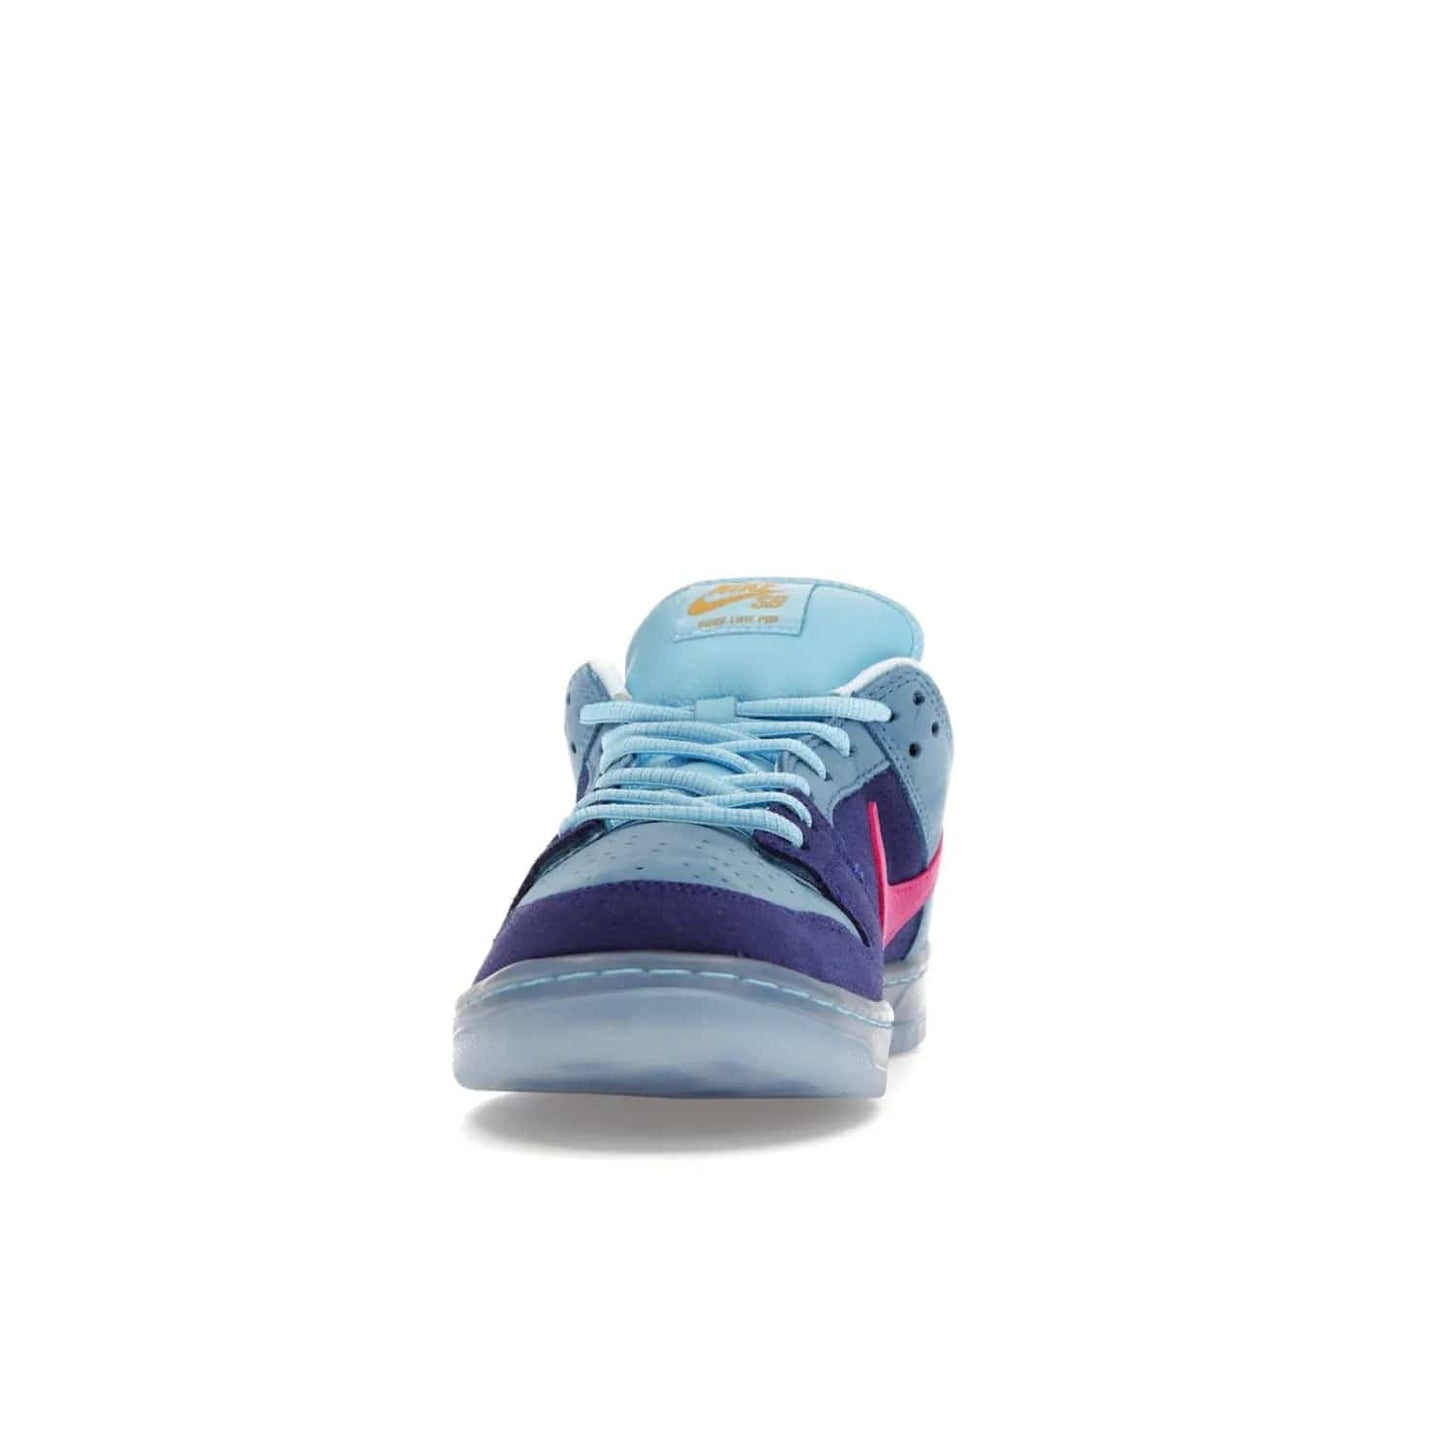 Nike SB Dunk Low Run The Jewels - Image 11 - Only at www.BallersClubKickz.com - The Nike SB Dunk Low Run The Jewels pays tribute to the Run the Jewels 3 album cover. It features a blue suede upper with pink suede accents, gold branding and 3 lace sets. RTJ insoles complete this limited edition sneaker. Get it now for your shoe collection.